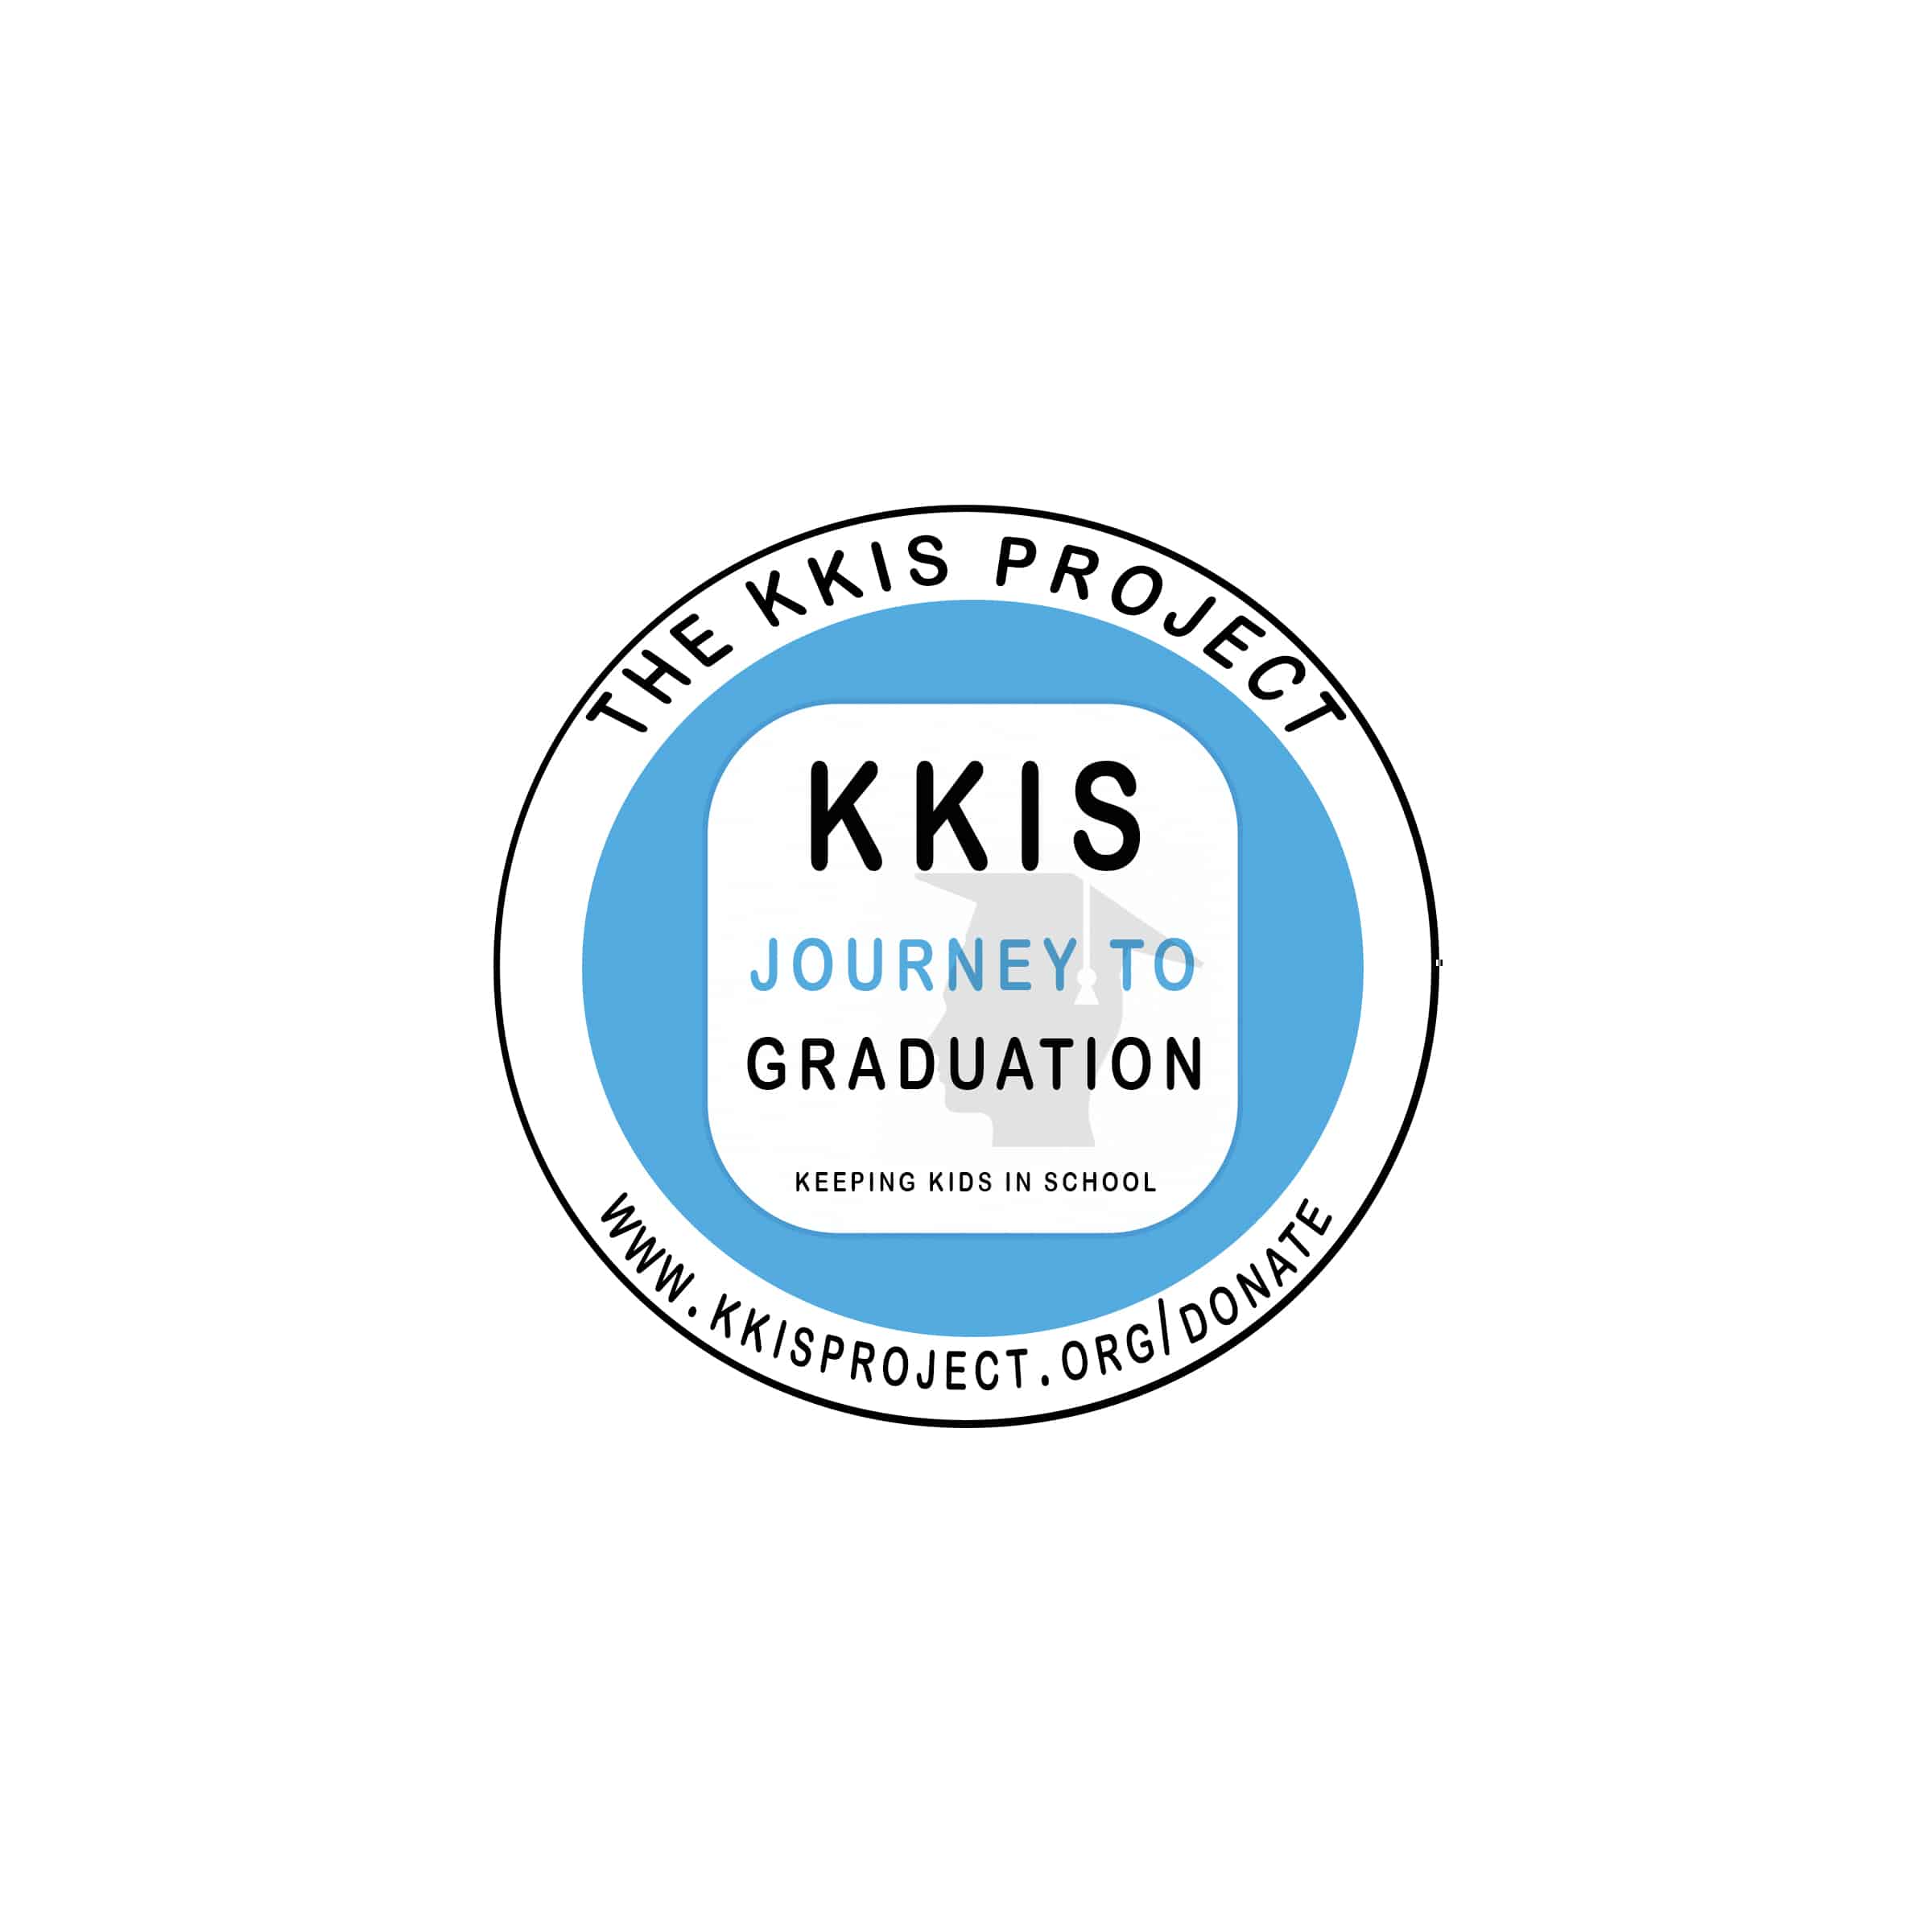 The Journey to Graduation-The KKIS Student’s 2nd Year of High School